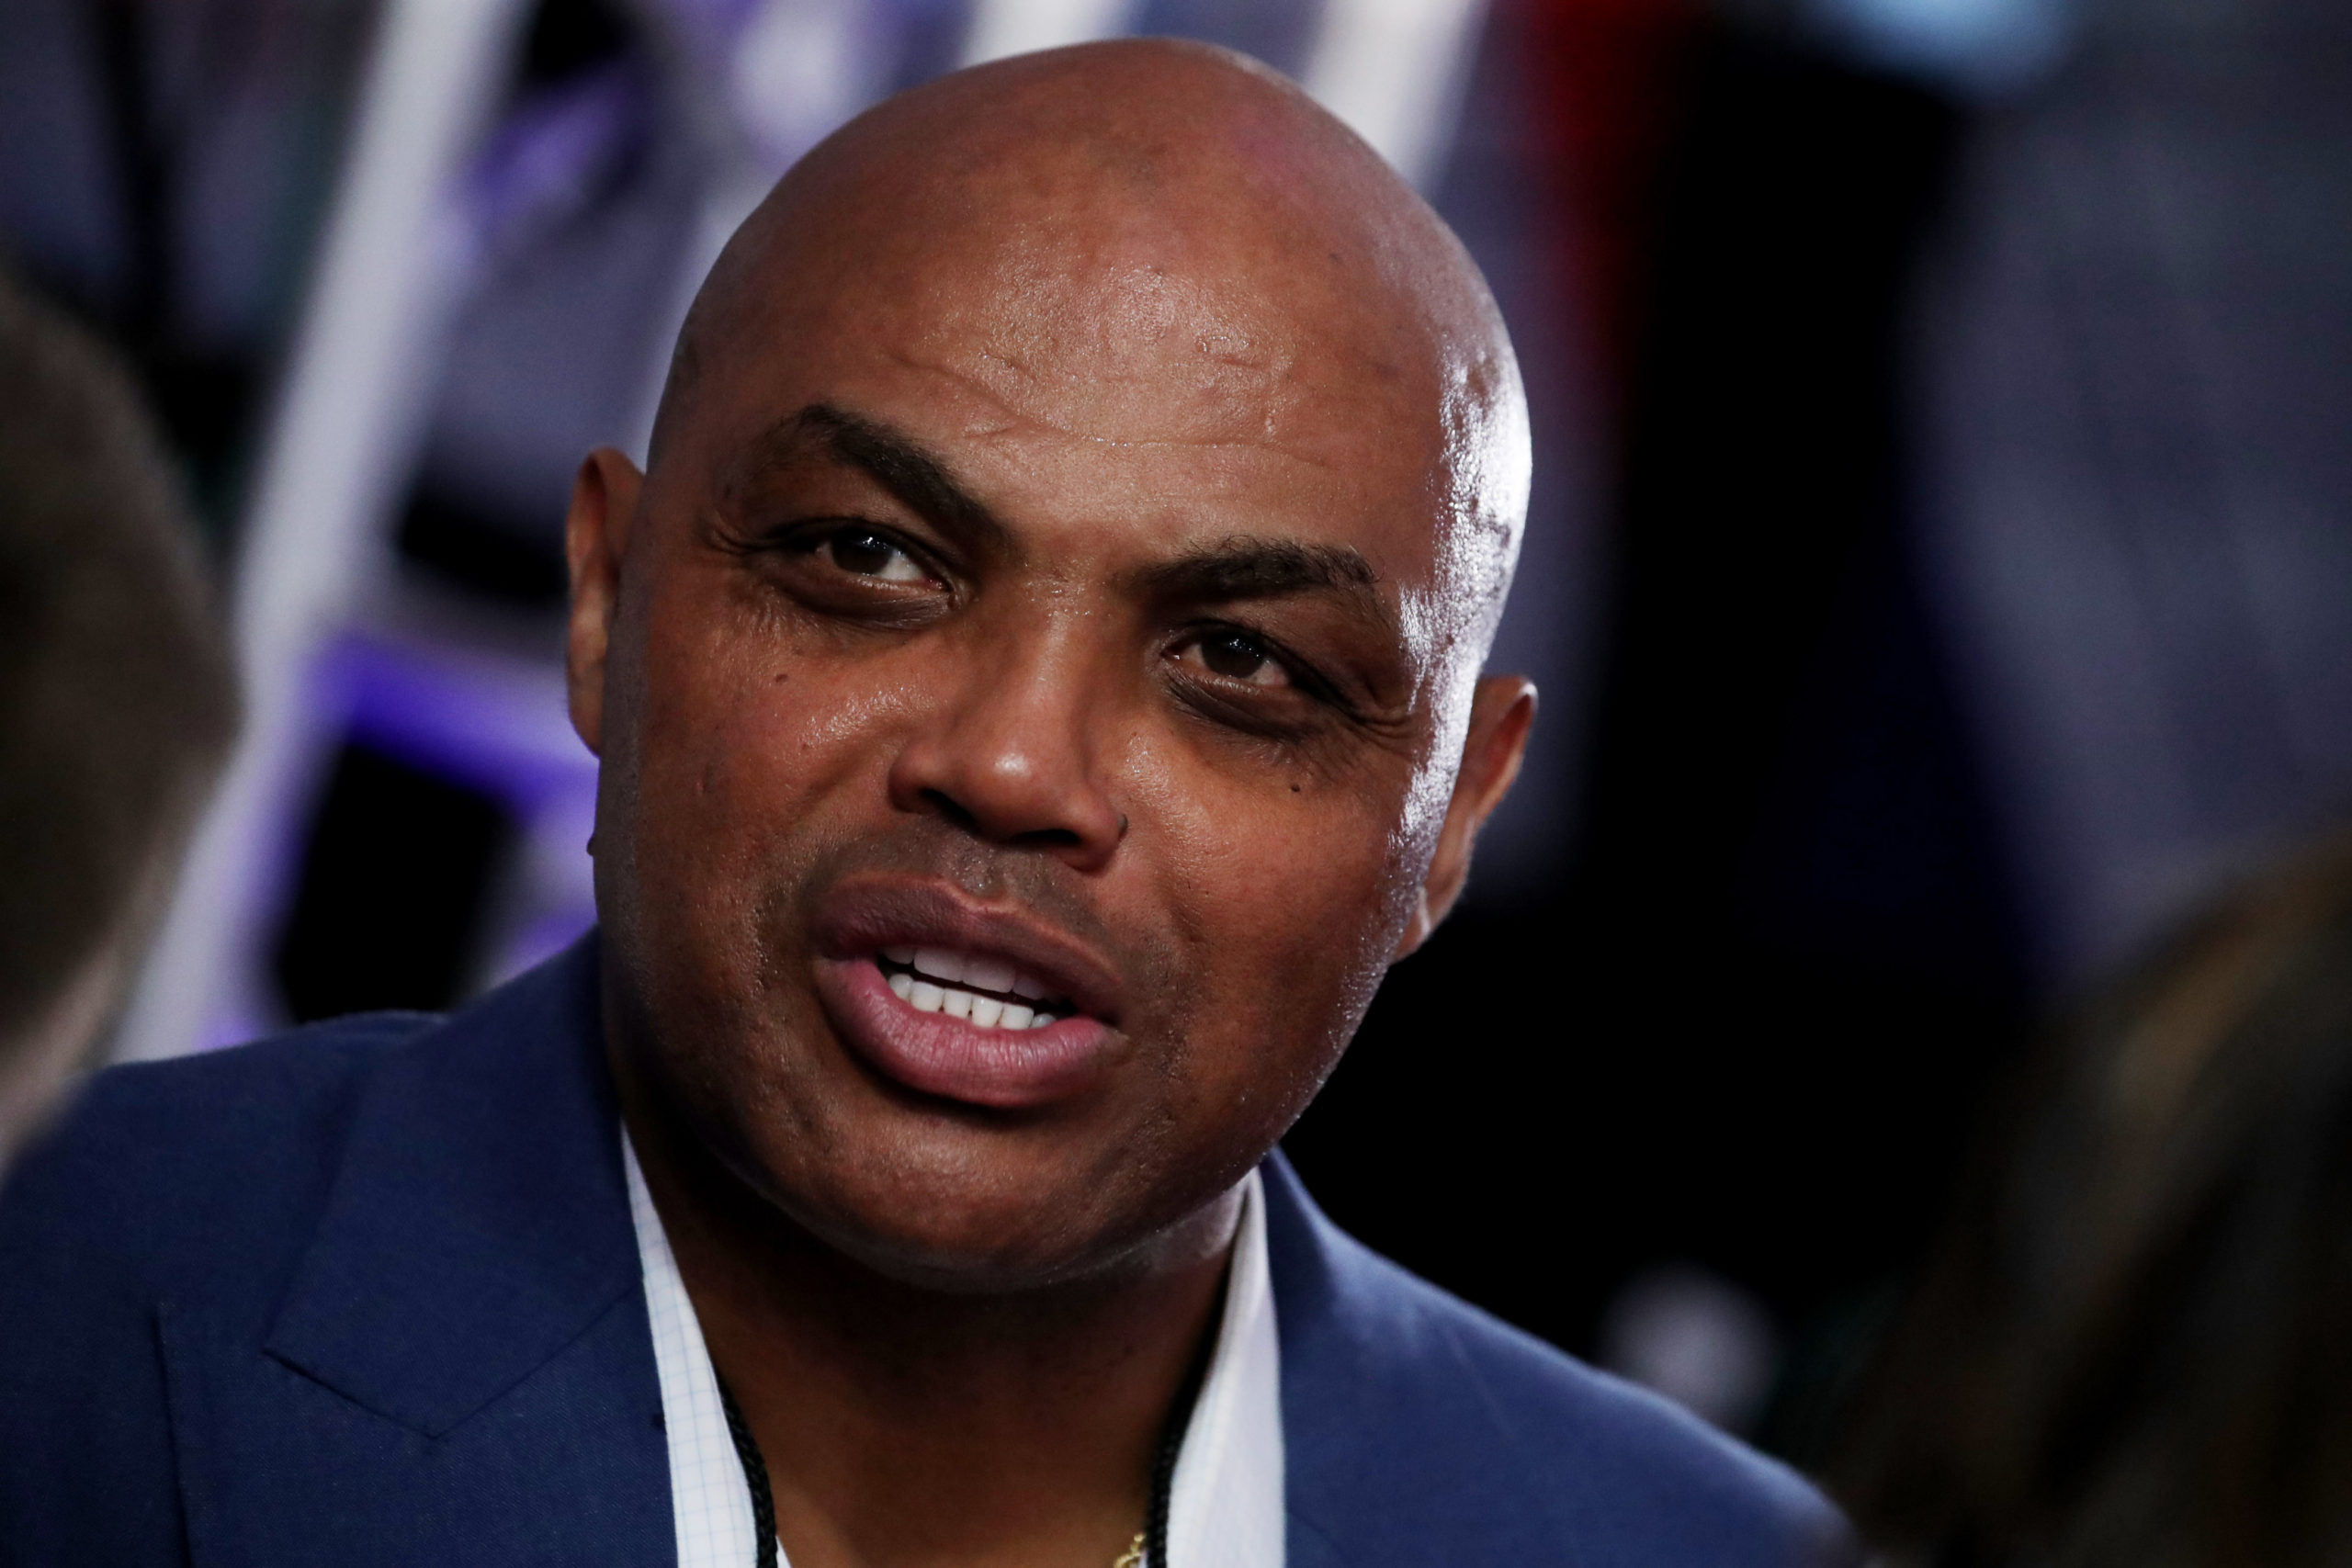 Charles Barkley to Invest in Affordable Housing in Alabama Hometown